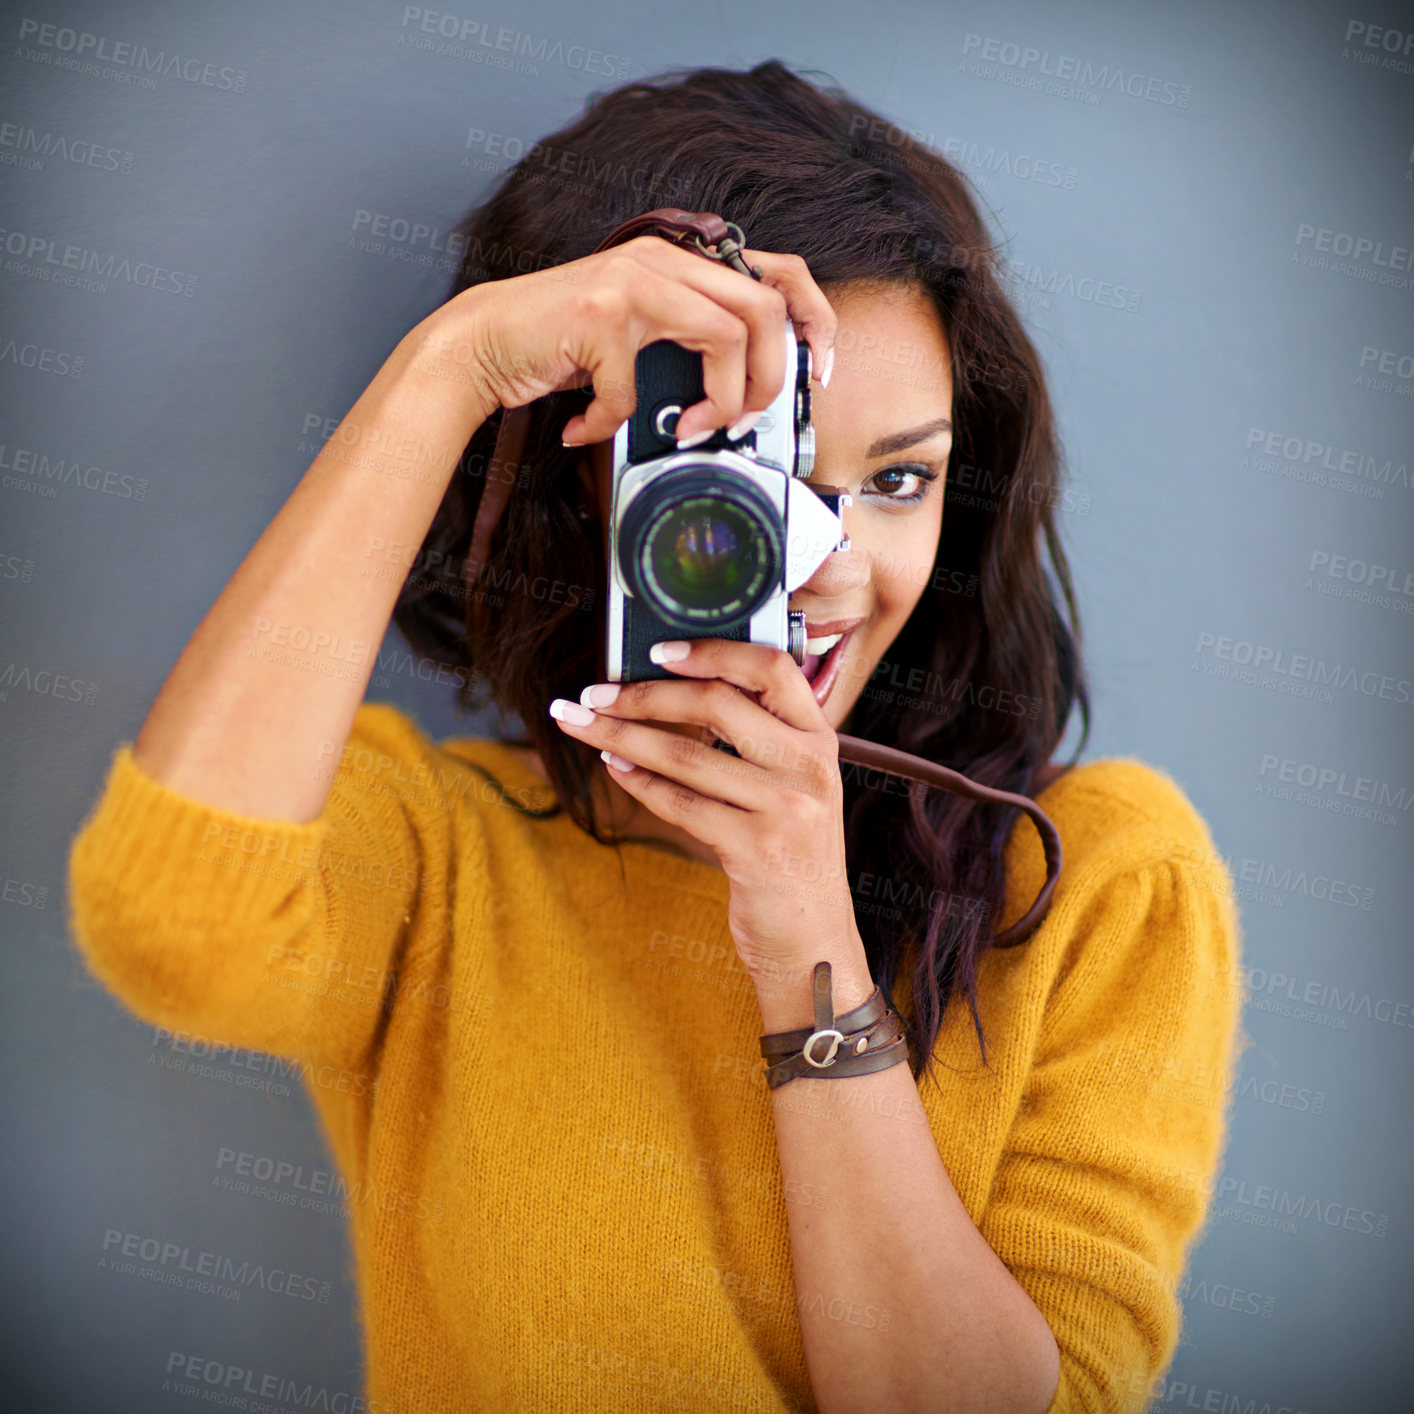 Buy stock photo Studio portrait of a young woman using a vintage camera against a gray background